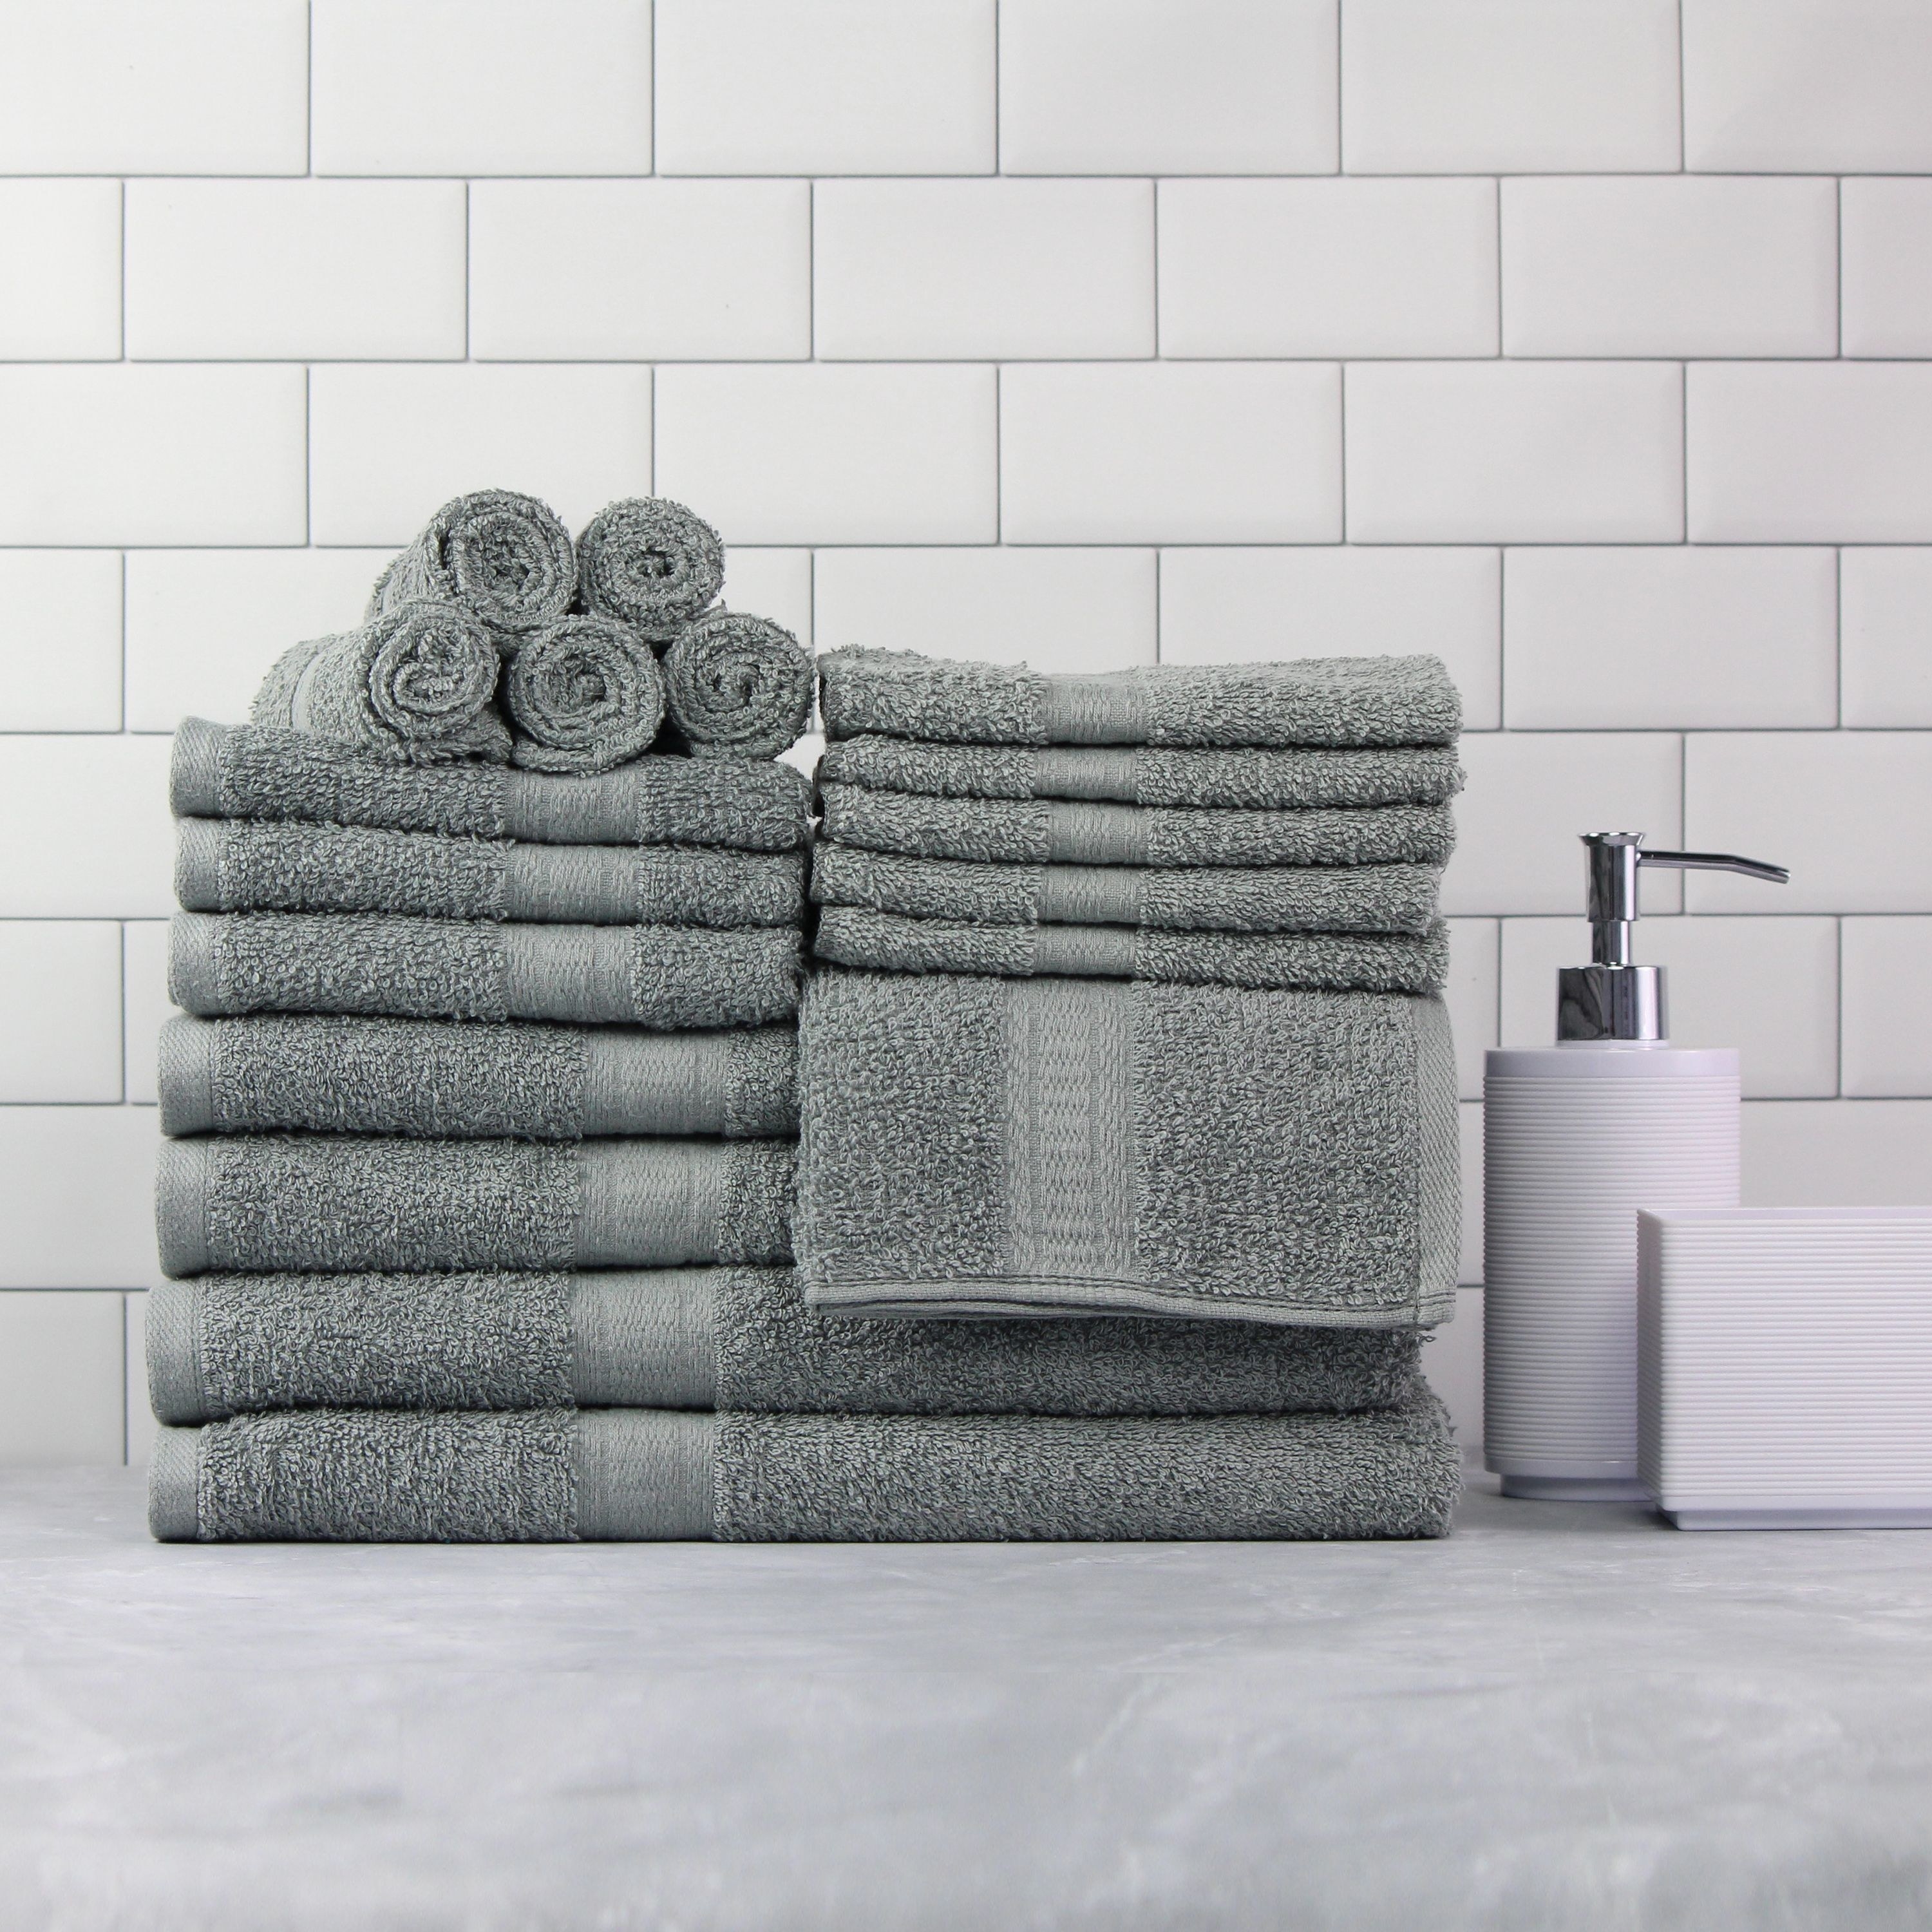 gray bath towels folded up on a bathroom coutner